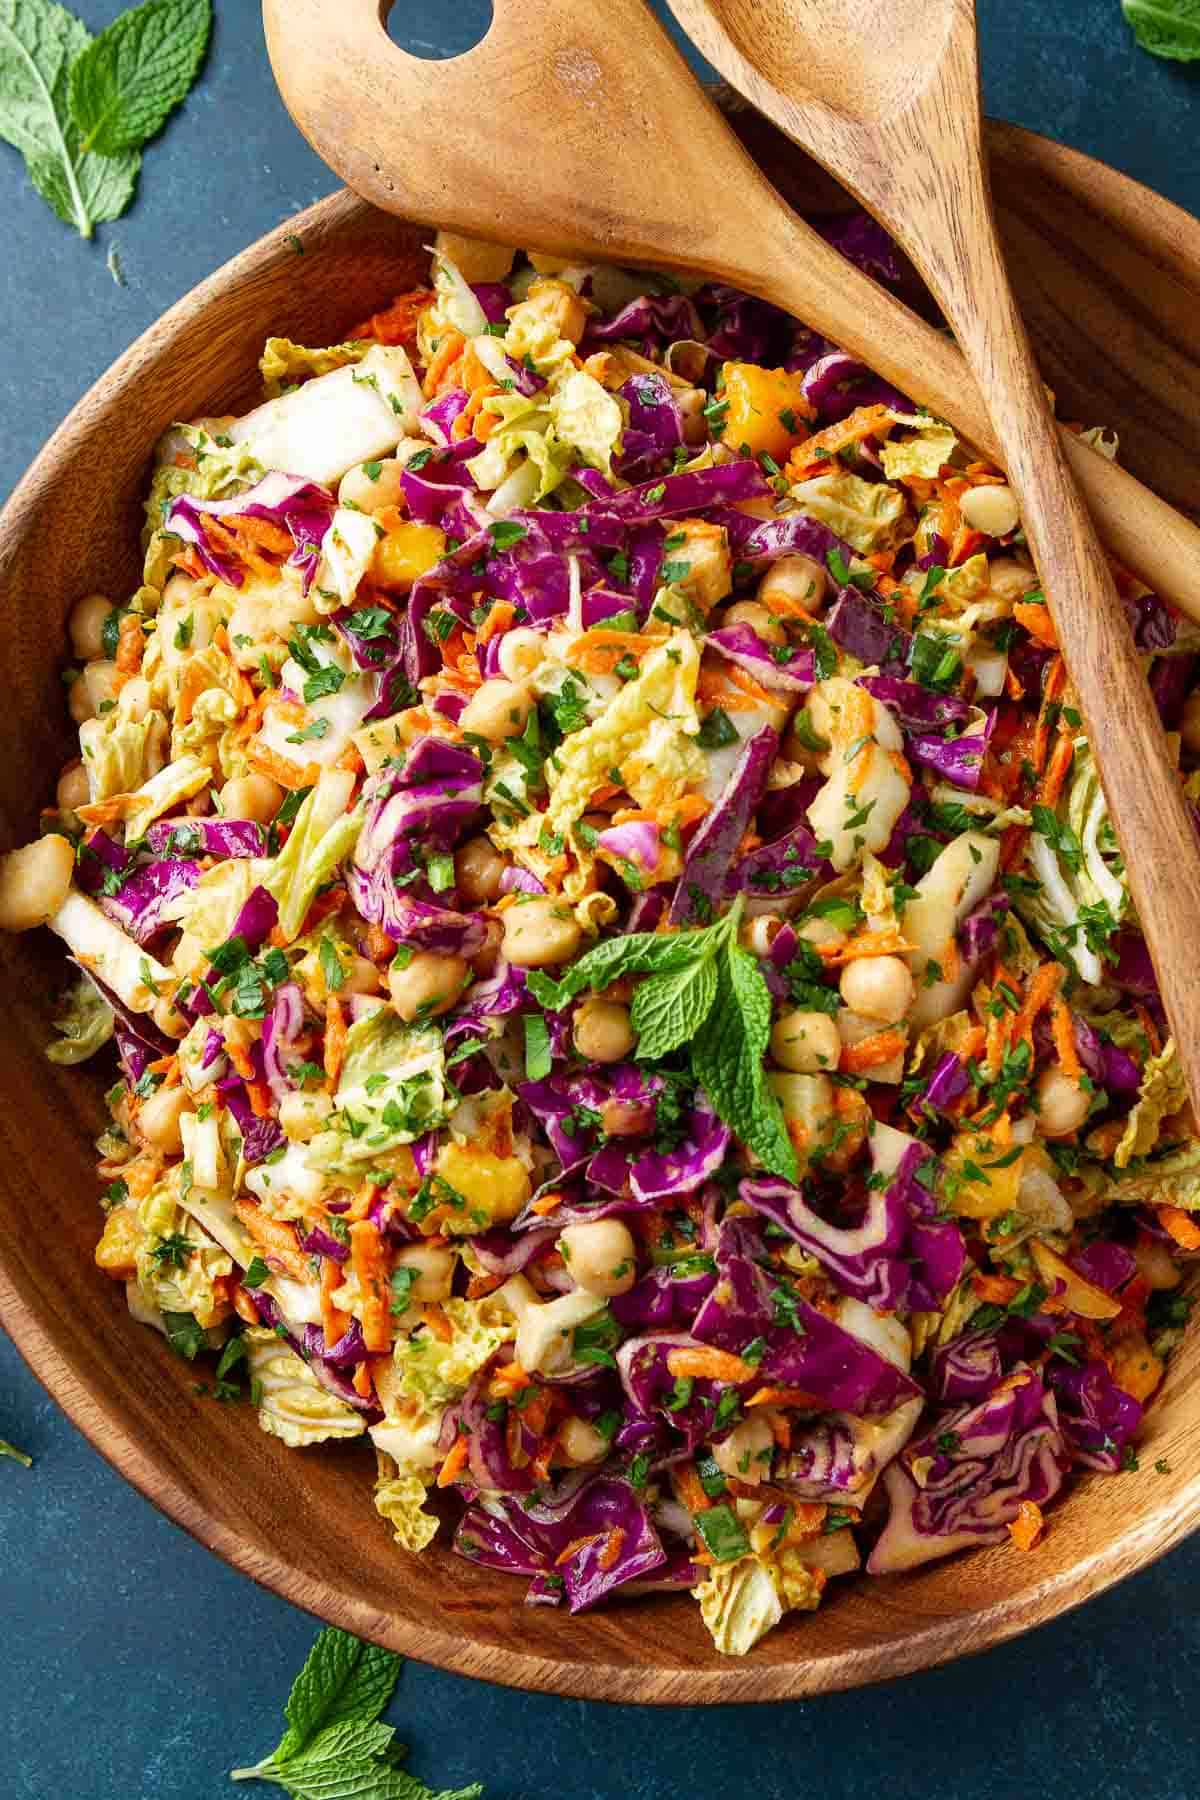 Slaw with chickpeas and peanut dressing in a large wooden salad bowl.